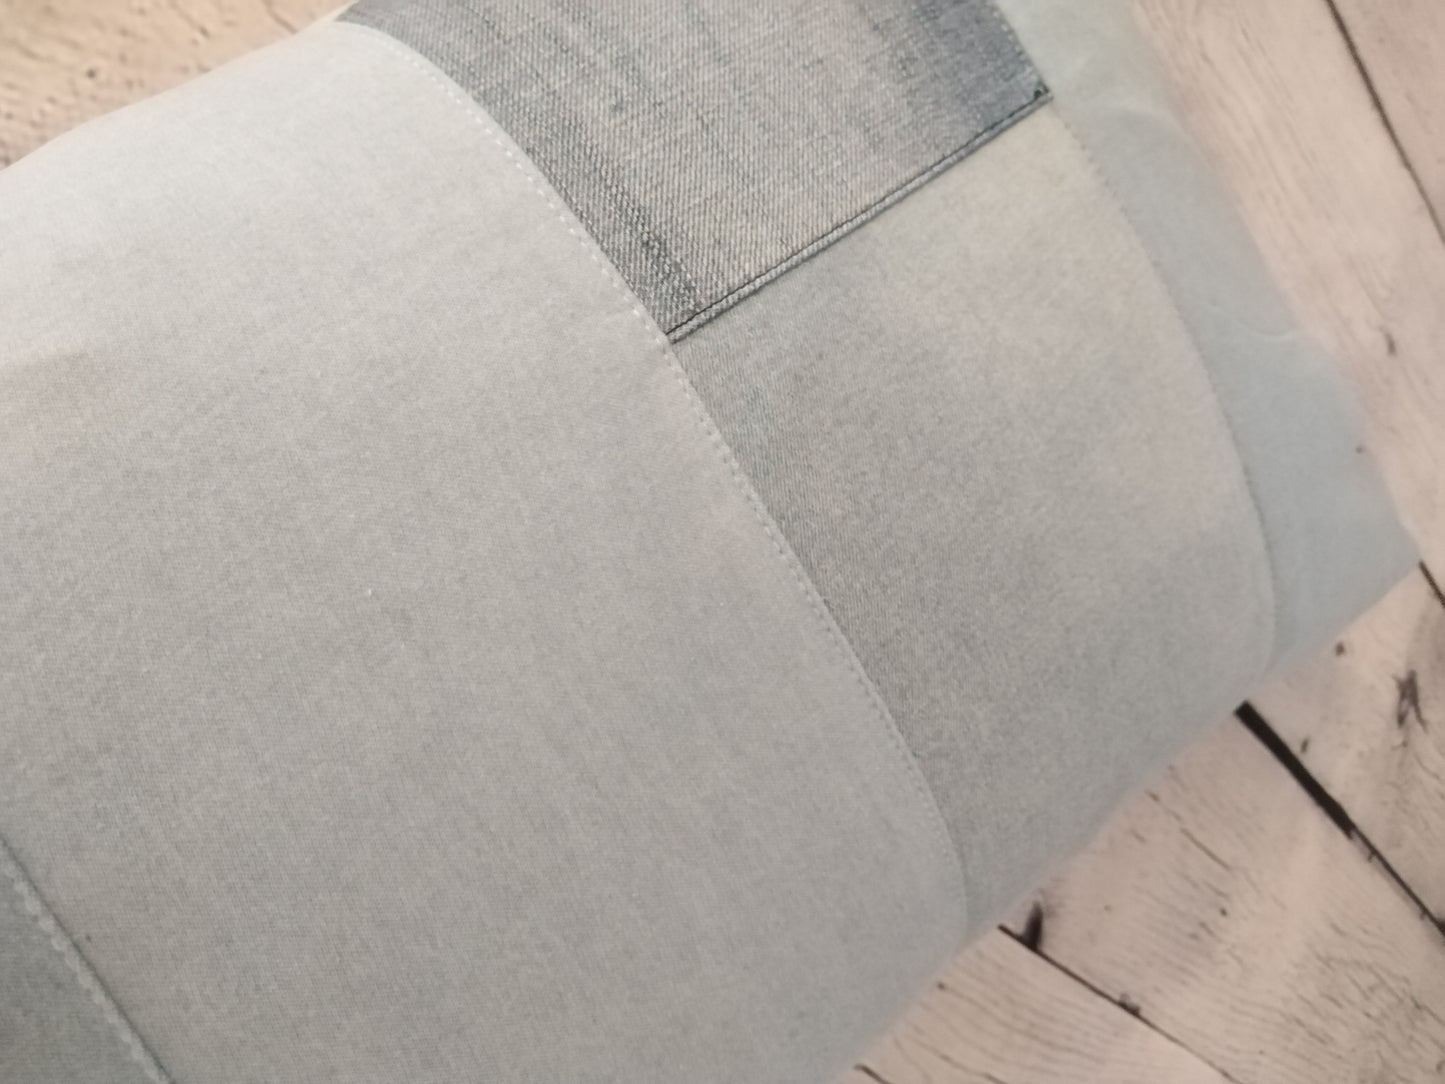 Light denim cushion from old jeans